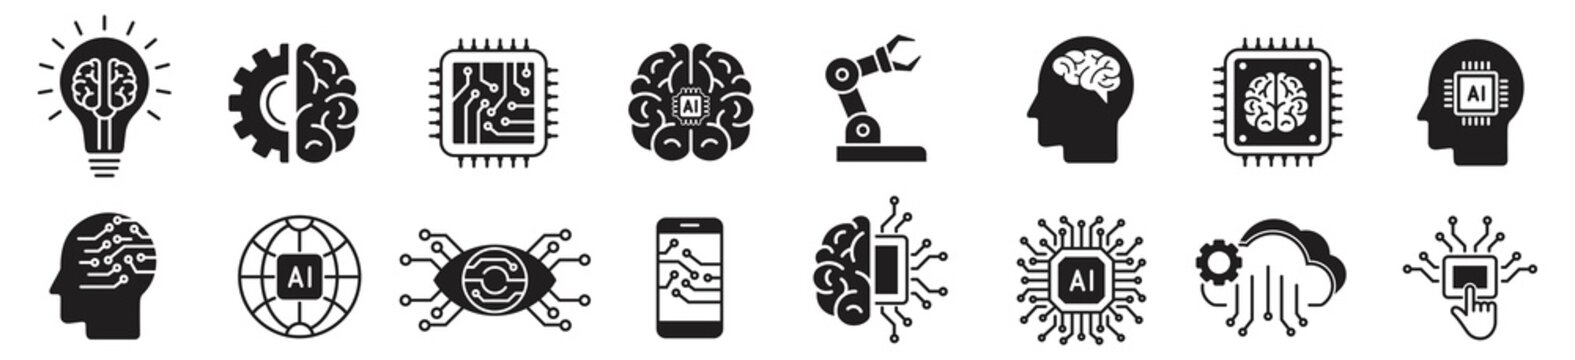 Artificial intelligence icons set. Simple set of artificial intelligence vector illustration on white background.